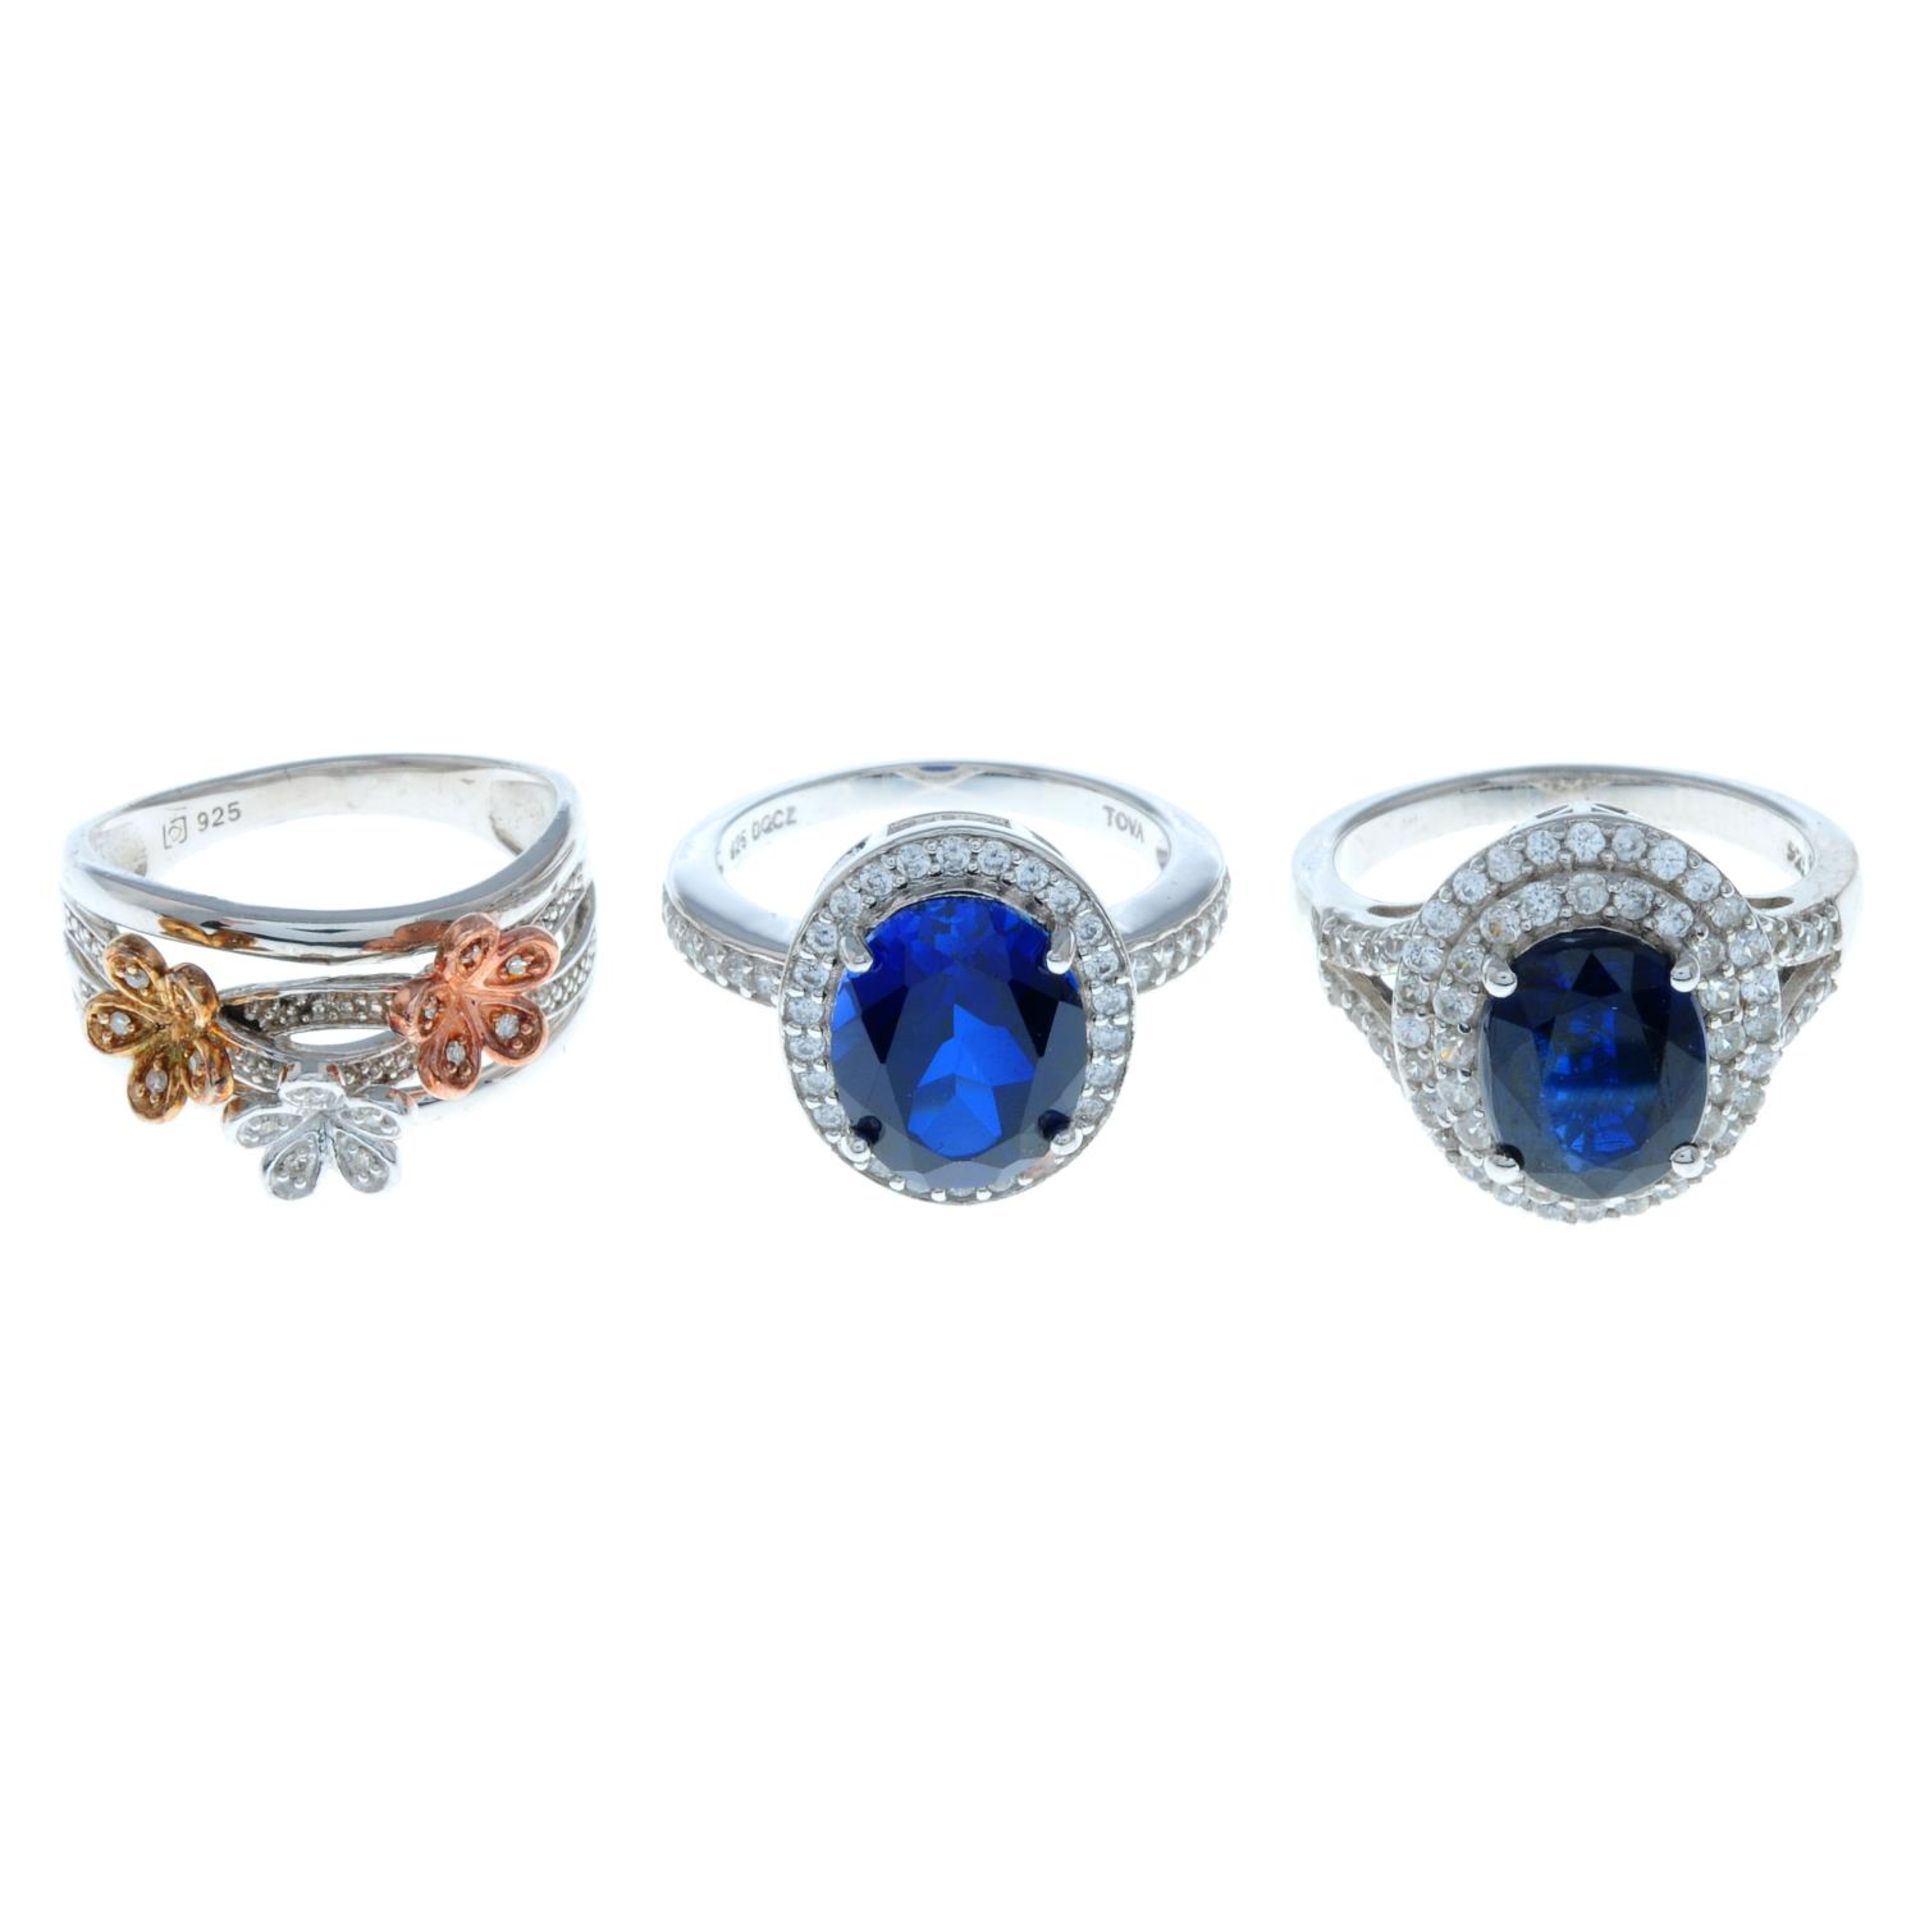 Eleven cubic zirconia and gem-set rings,